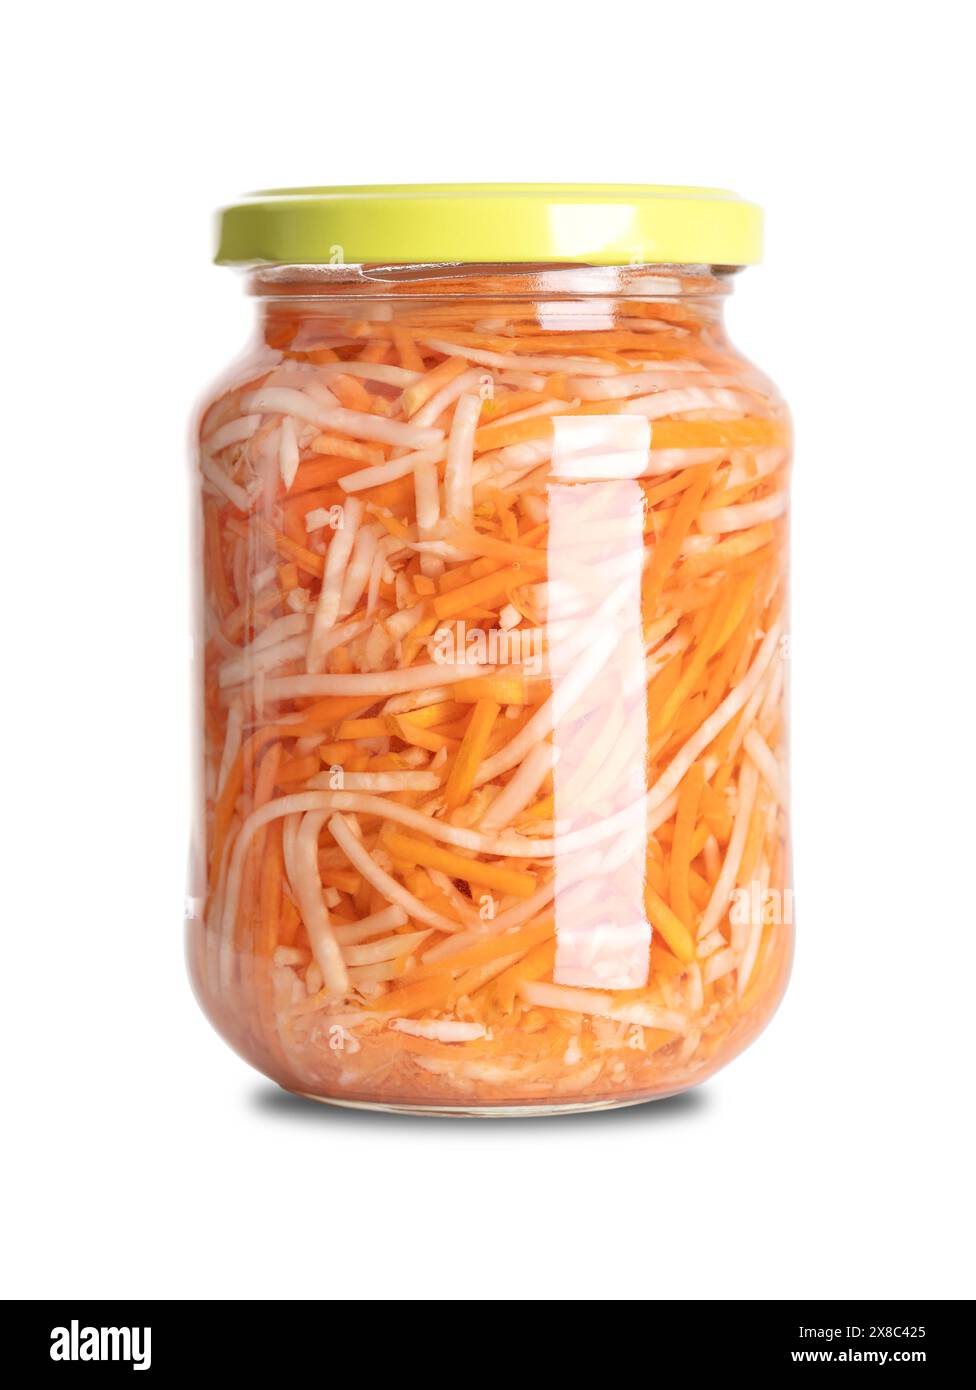 Pickled celeriac and carrot salad in a glass jar. Strips of celery root or knob celery, and carrot strips, pasteurized and preserved in vinegar brine. Stock Photo